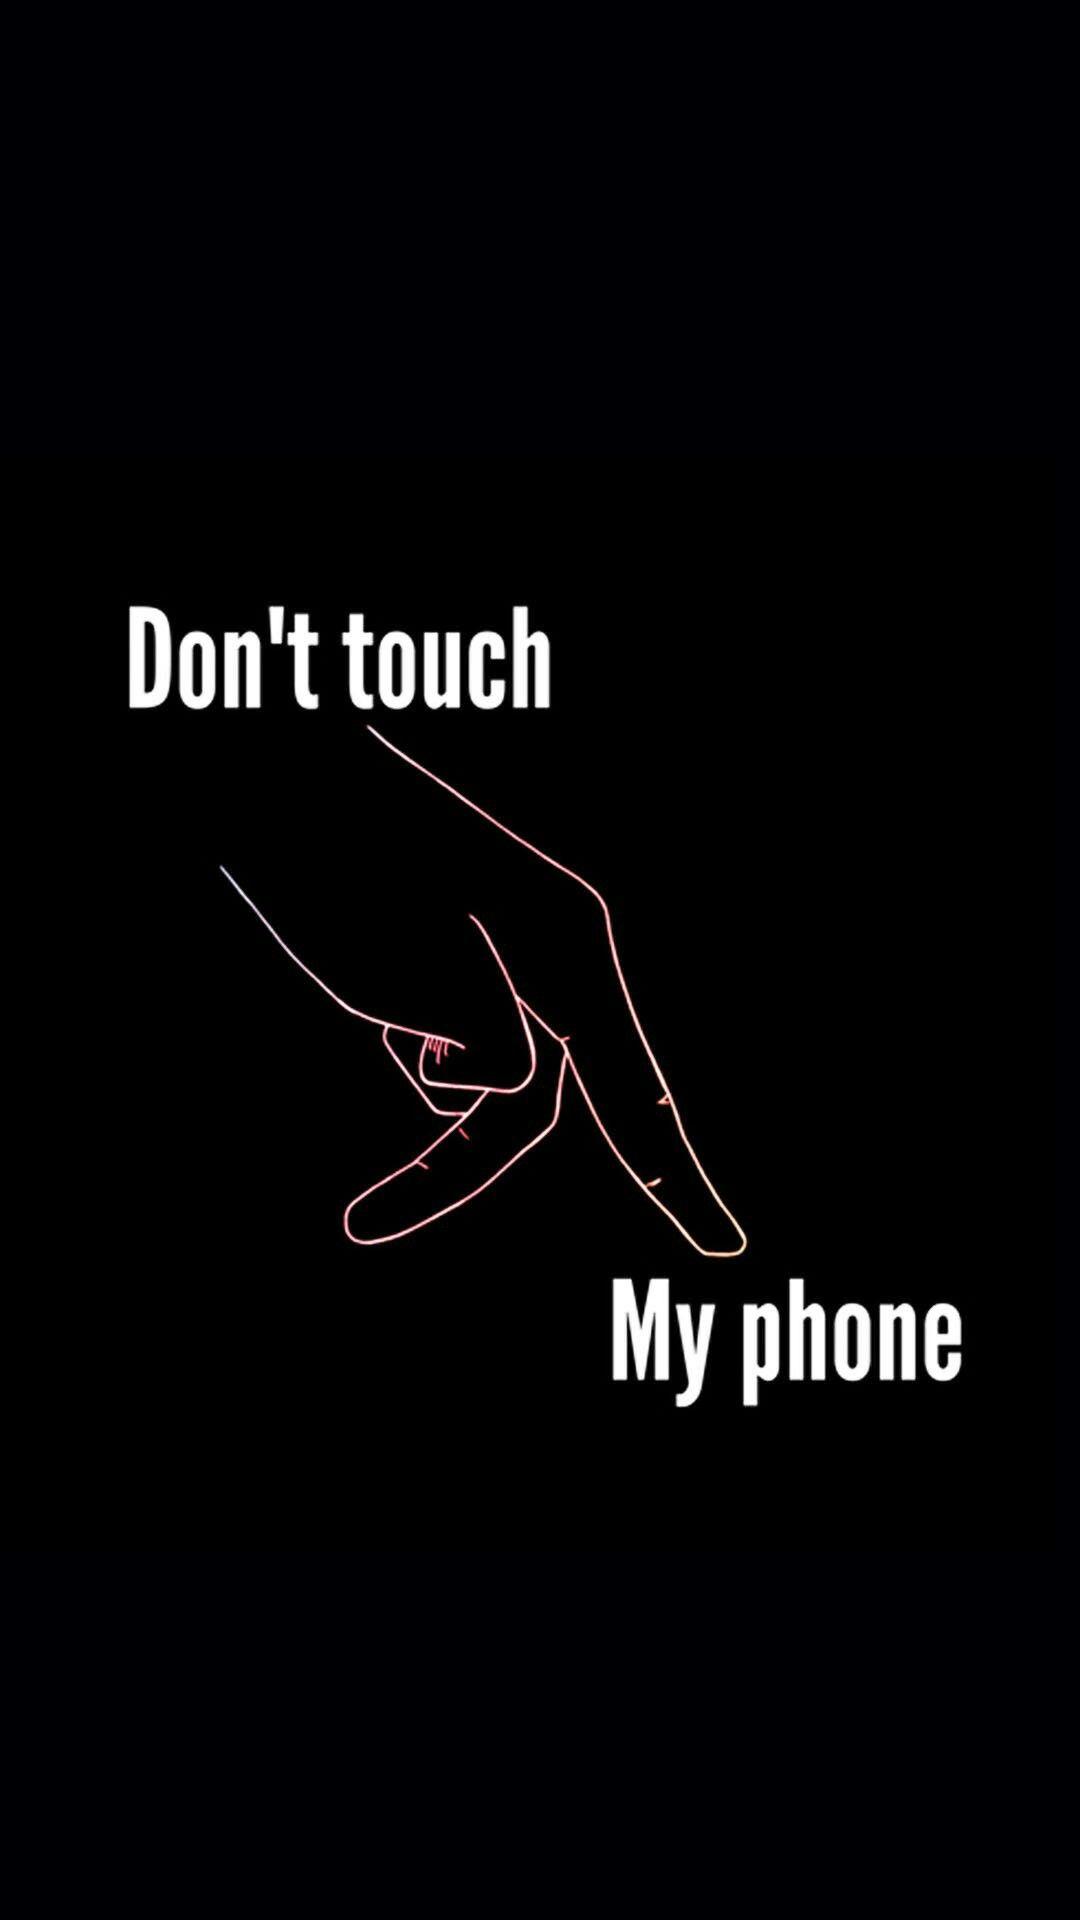 Don't touch my phone wallpaper. Dont touch my phone wallpaper